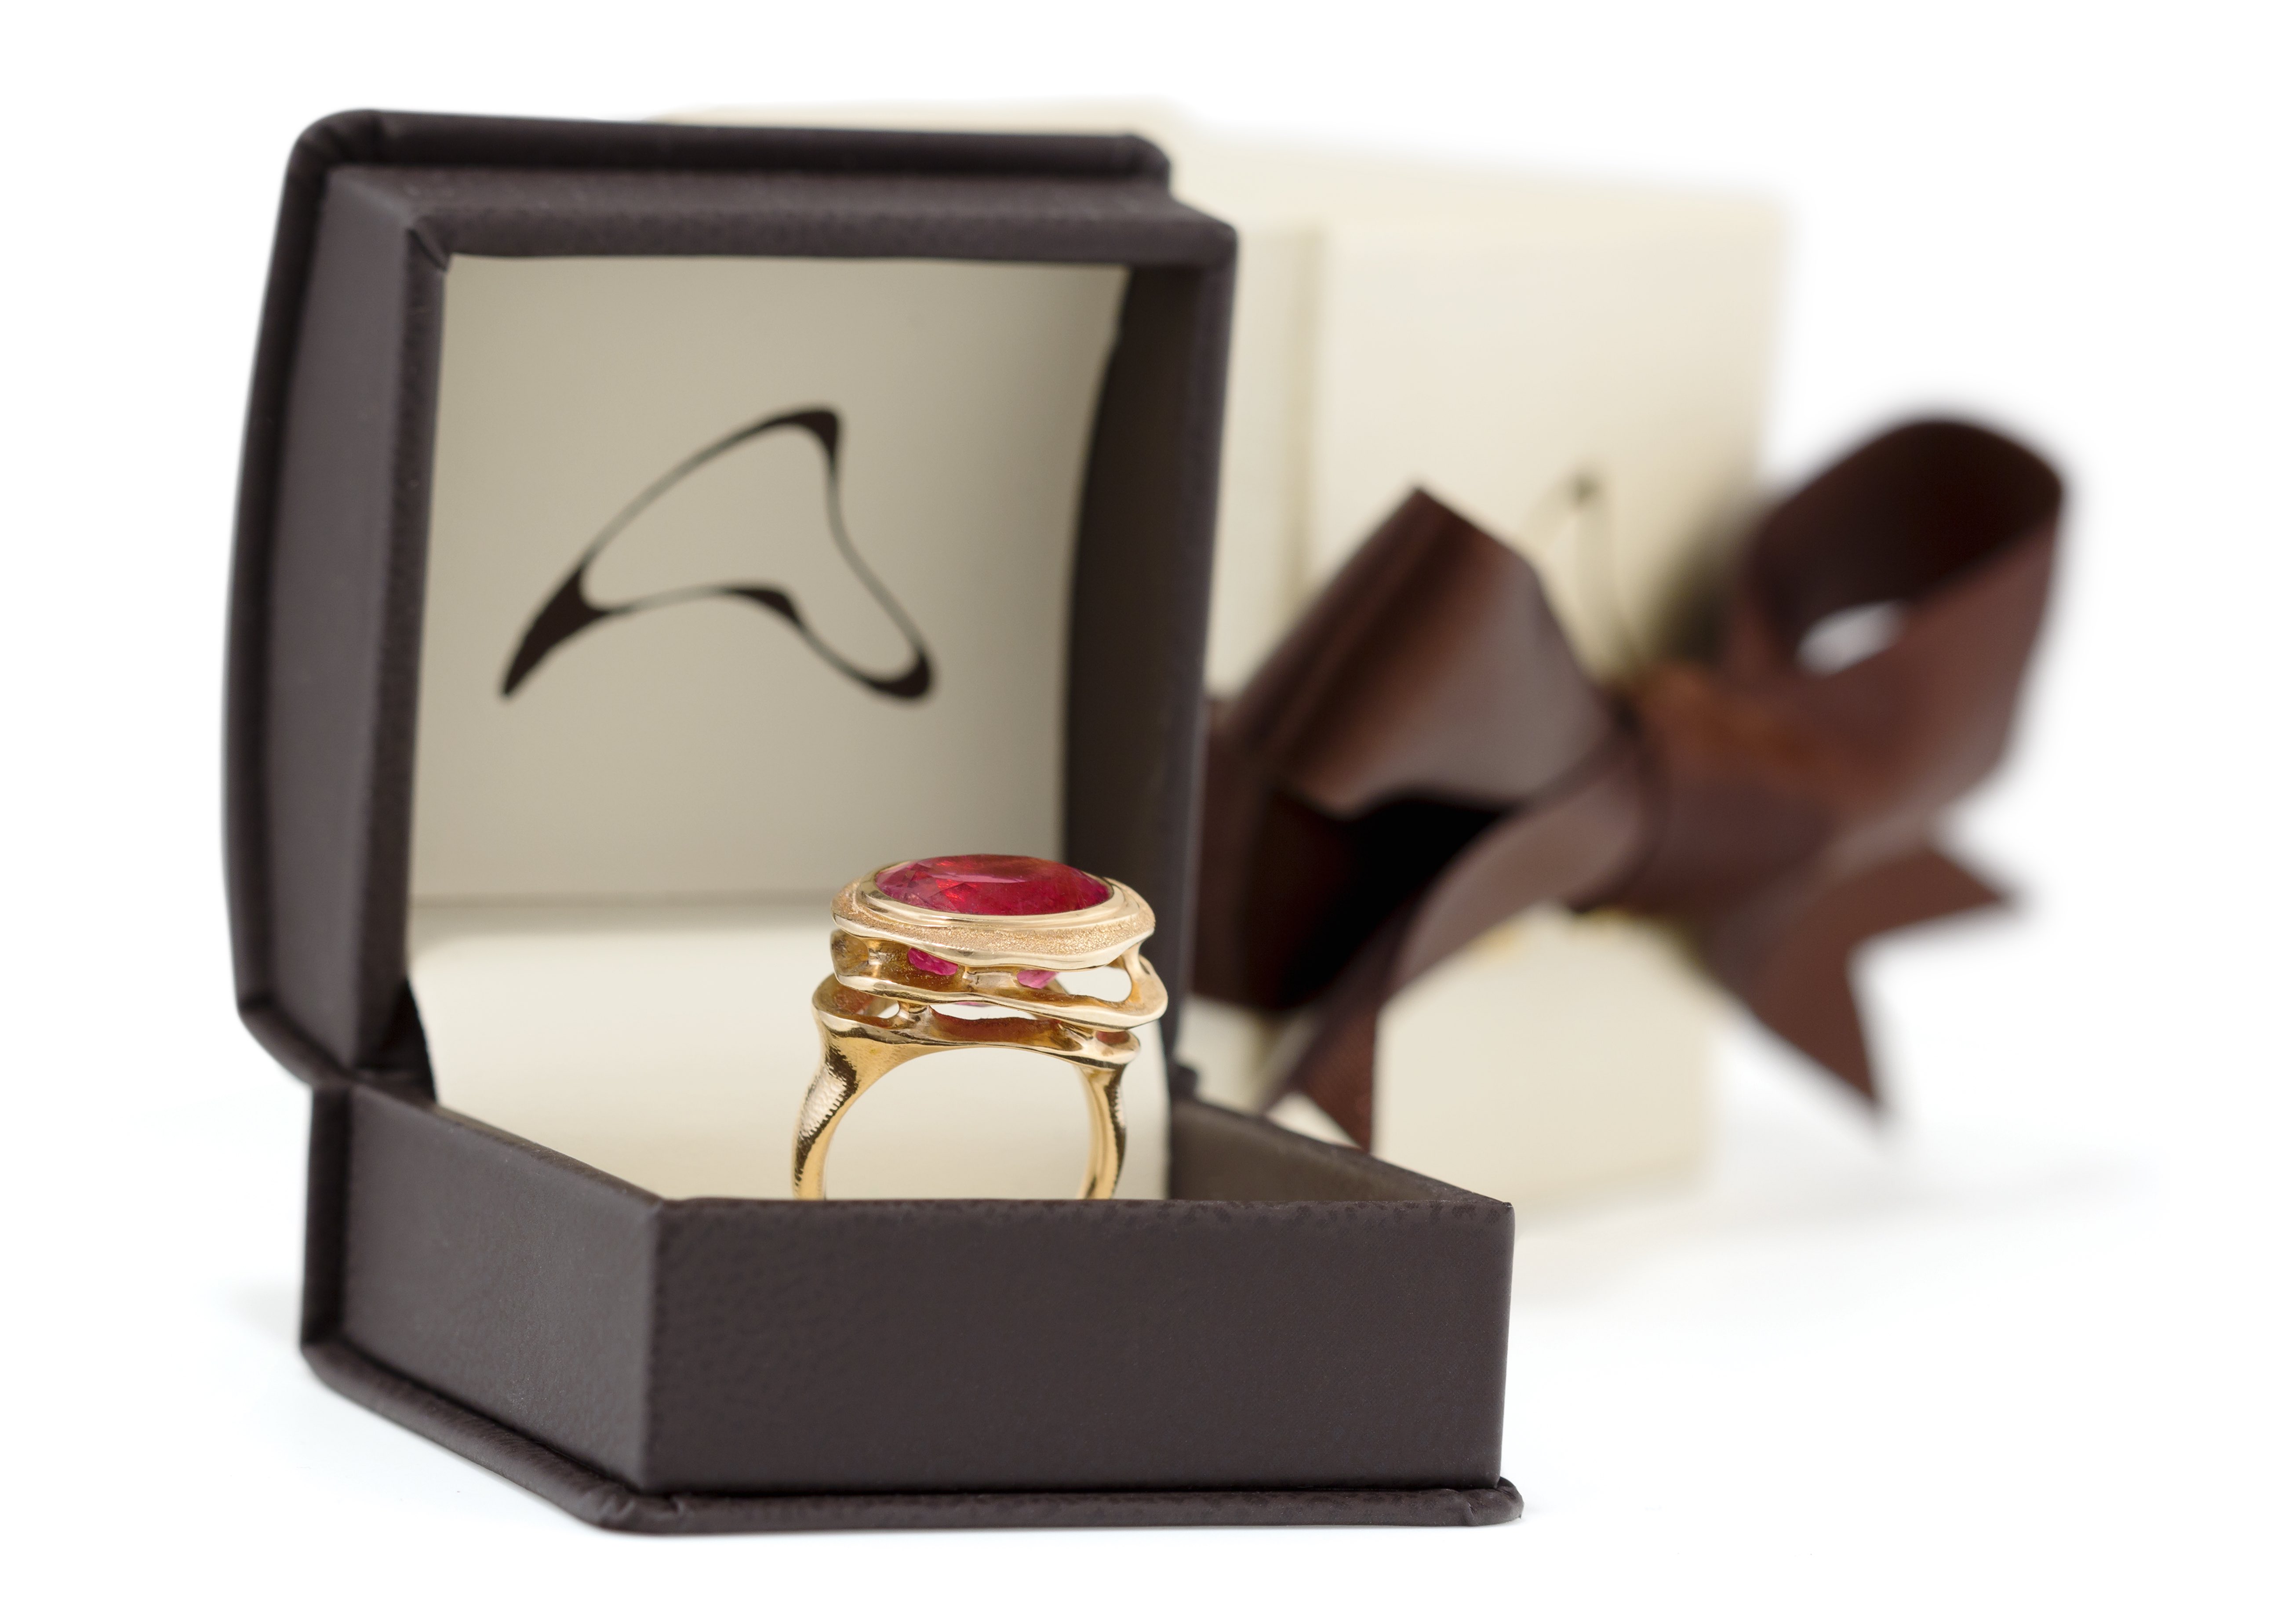 Reflections ring by Audrius Krulis. 18K rose gold and pink tourmaline